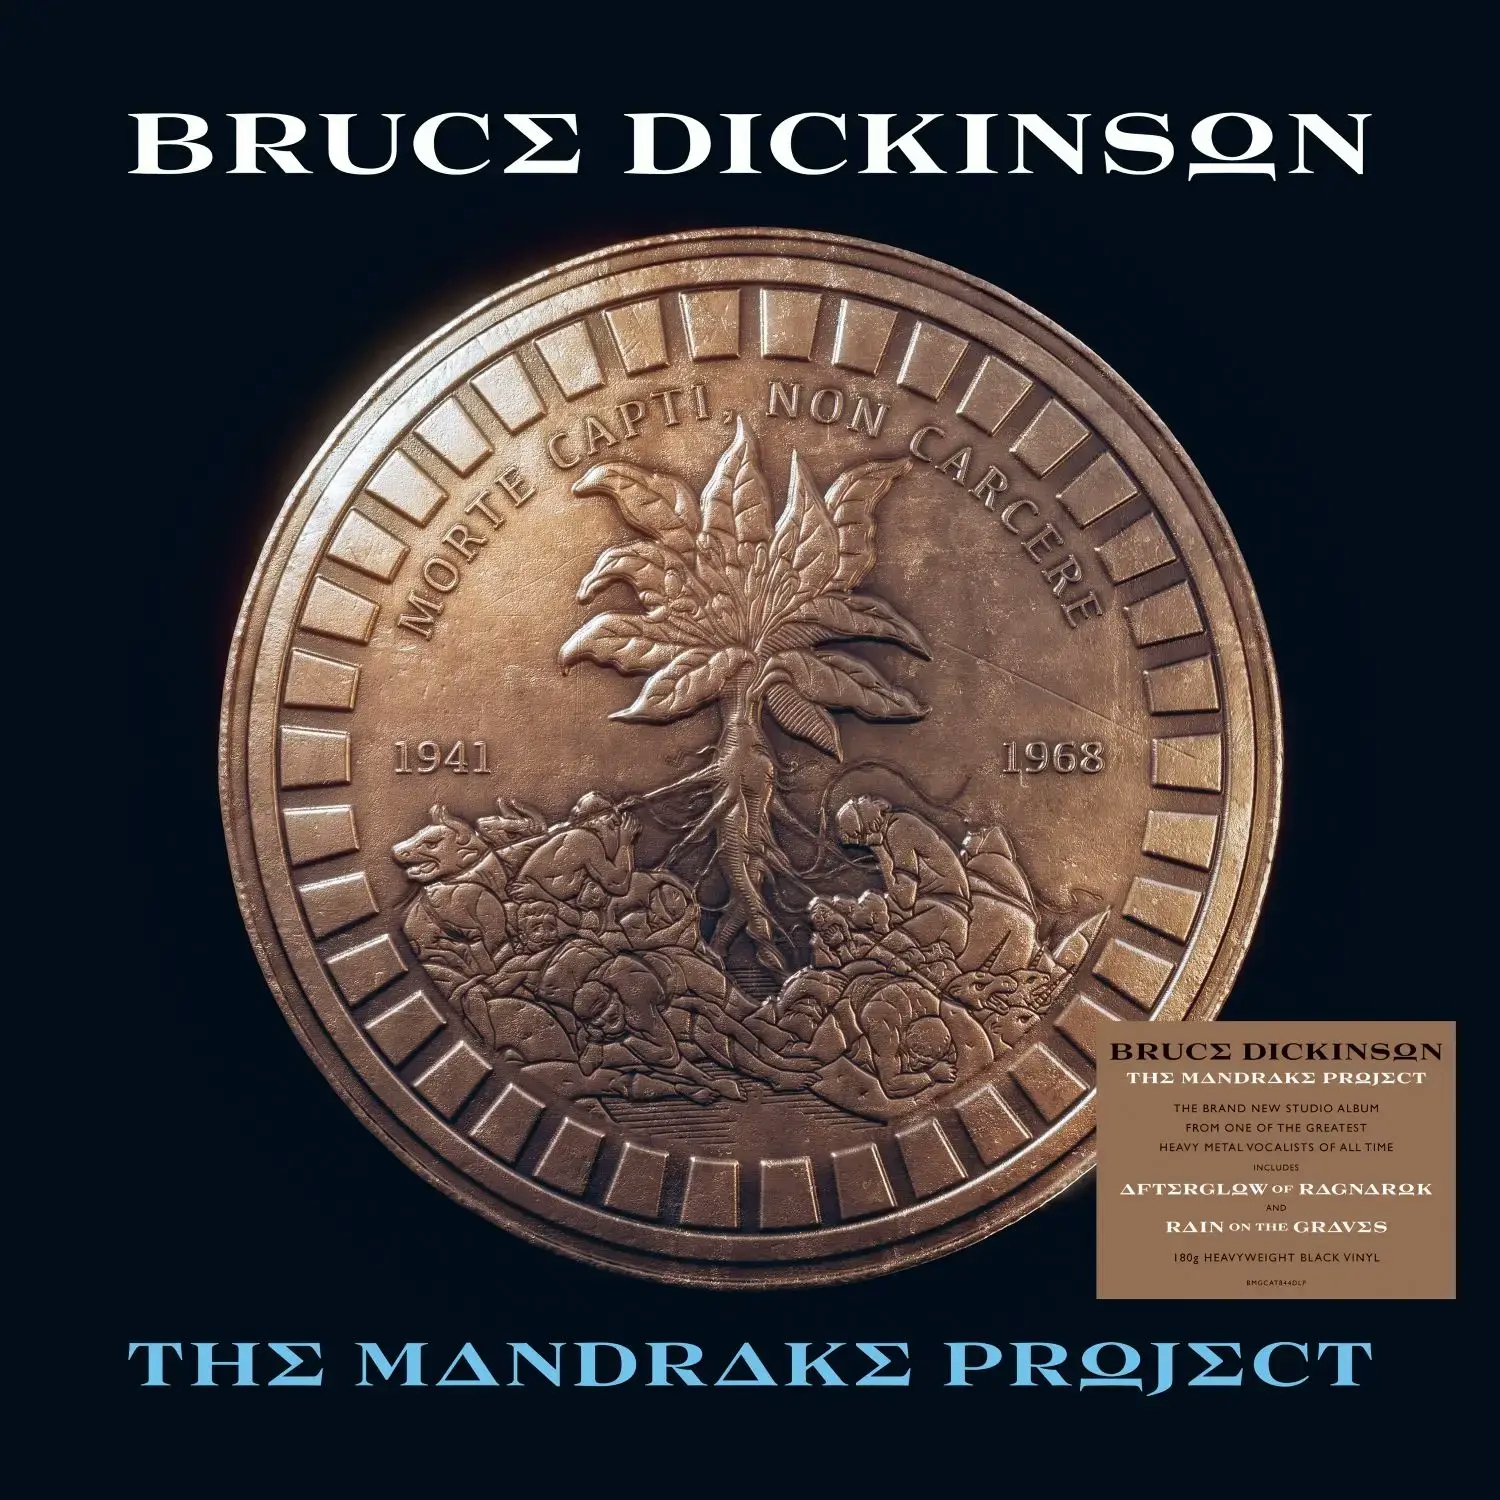 Album artwork for The Mandrake Project by Bruce Dickinson